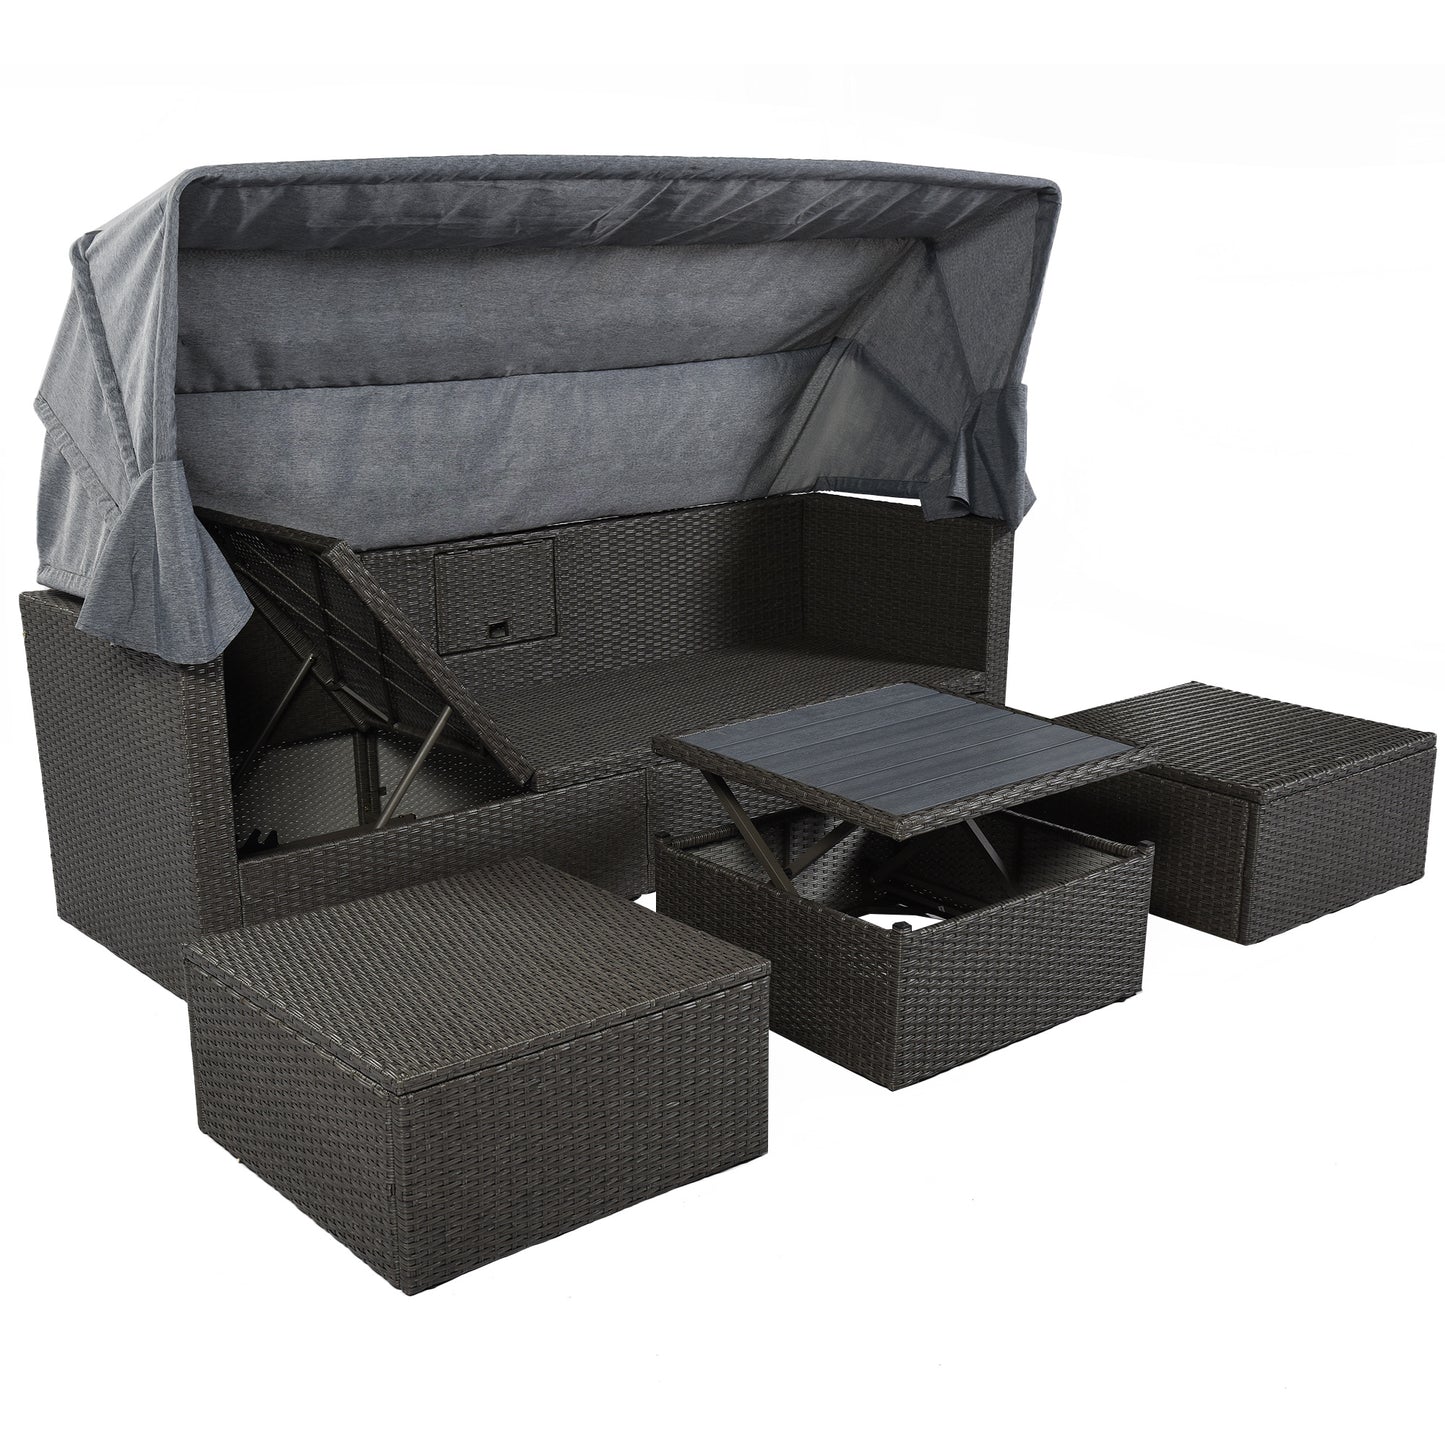 Outdoor Patio Rectangle Daybed with Retractable Canopy;  Wicker Furniture Sectional Seating with Washable Cushions;  Backyard;  Porch